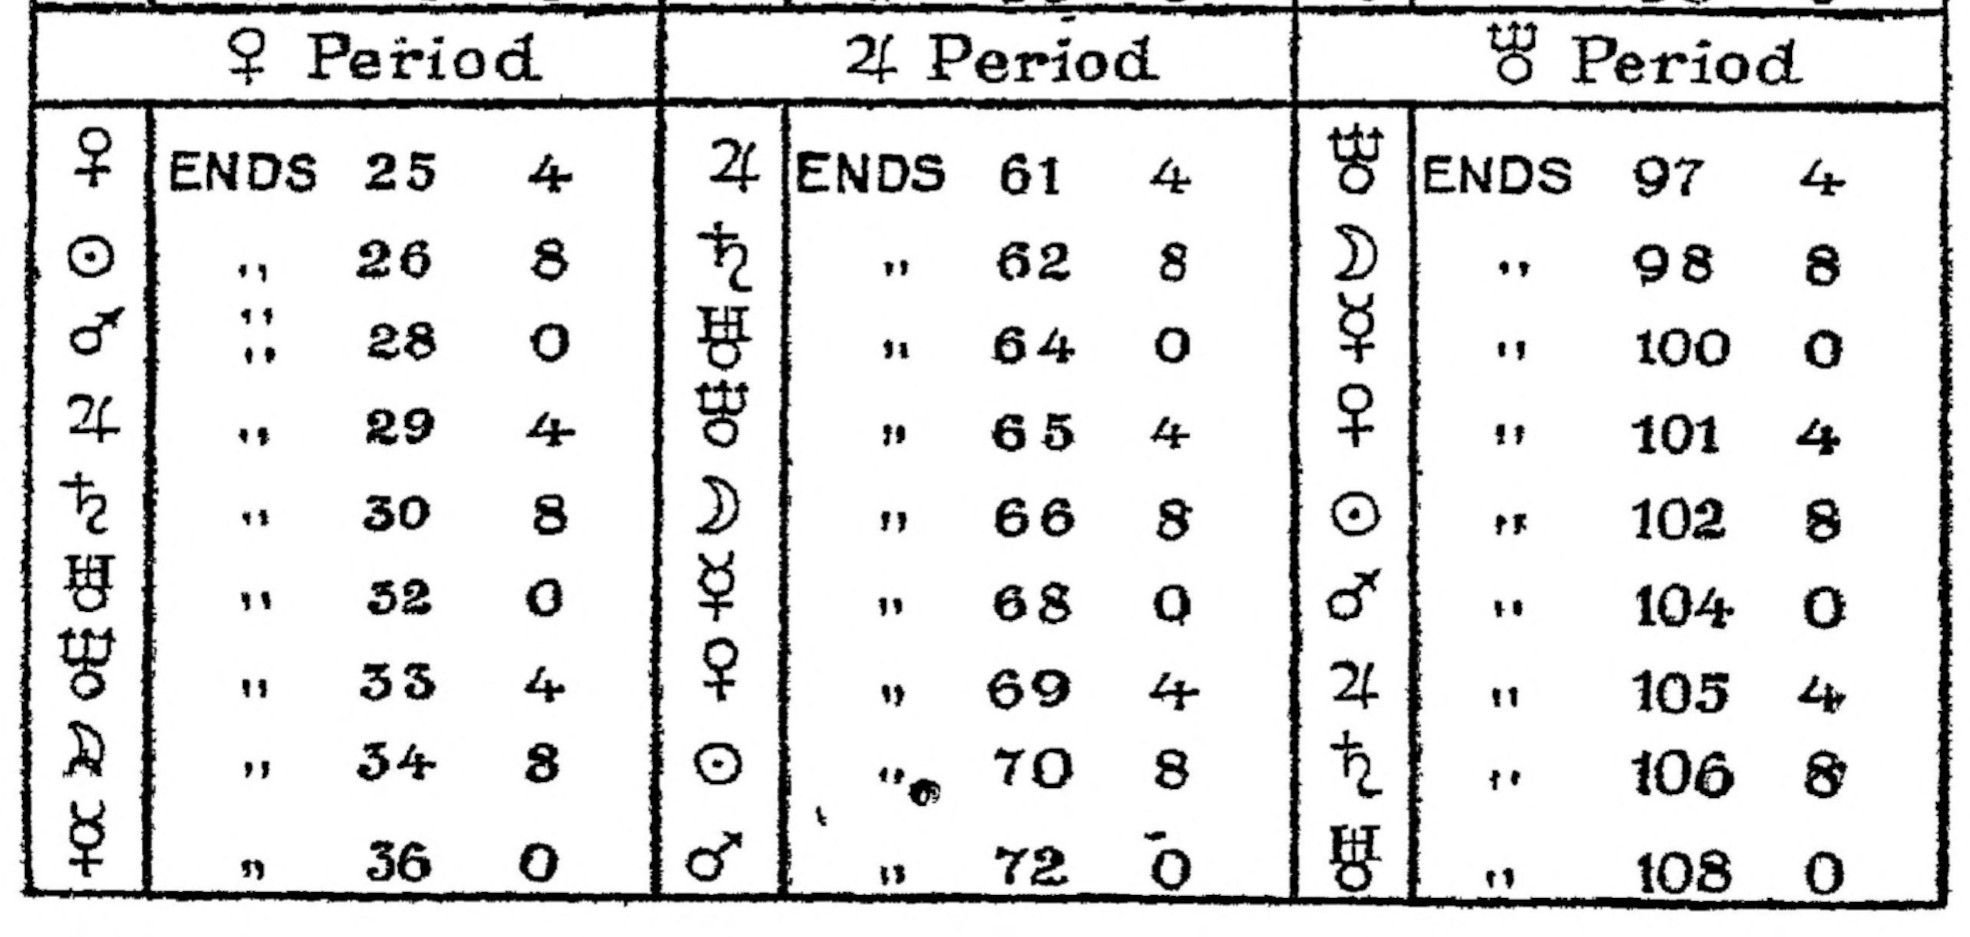 Figure 22-c. Planetary Periods by Sepharial.